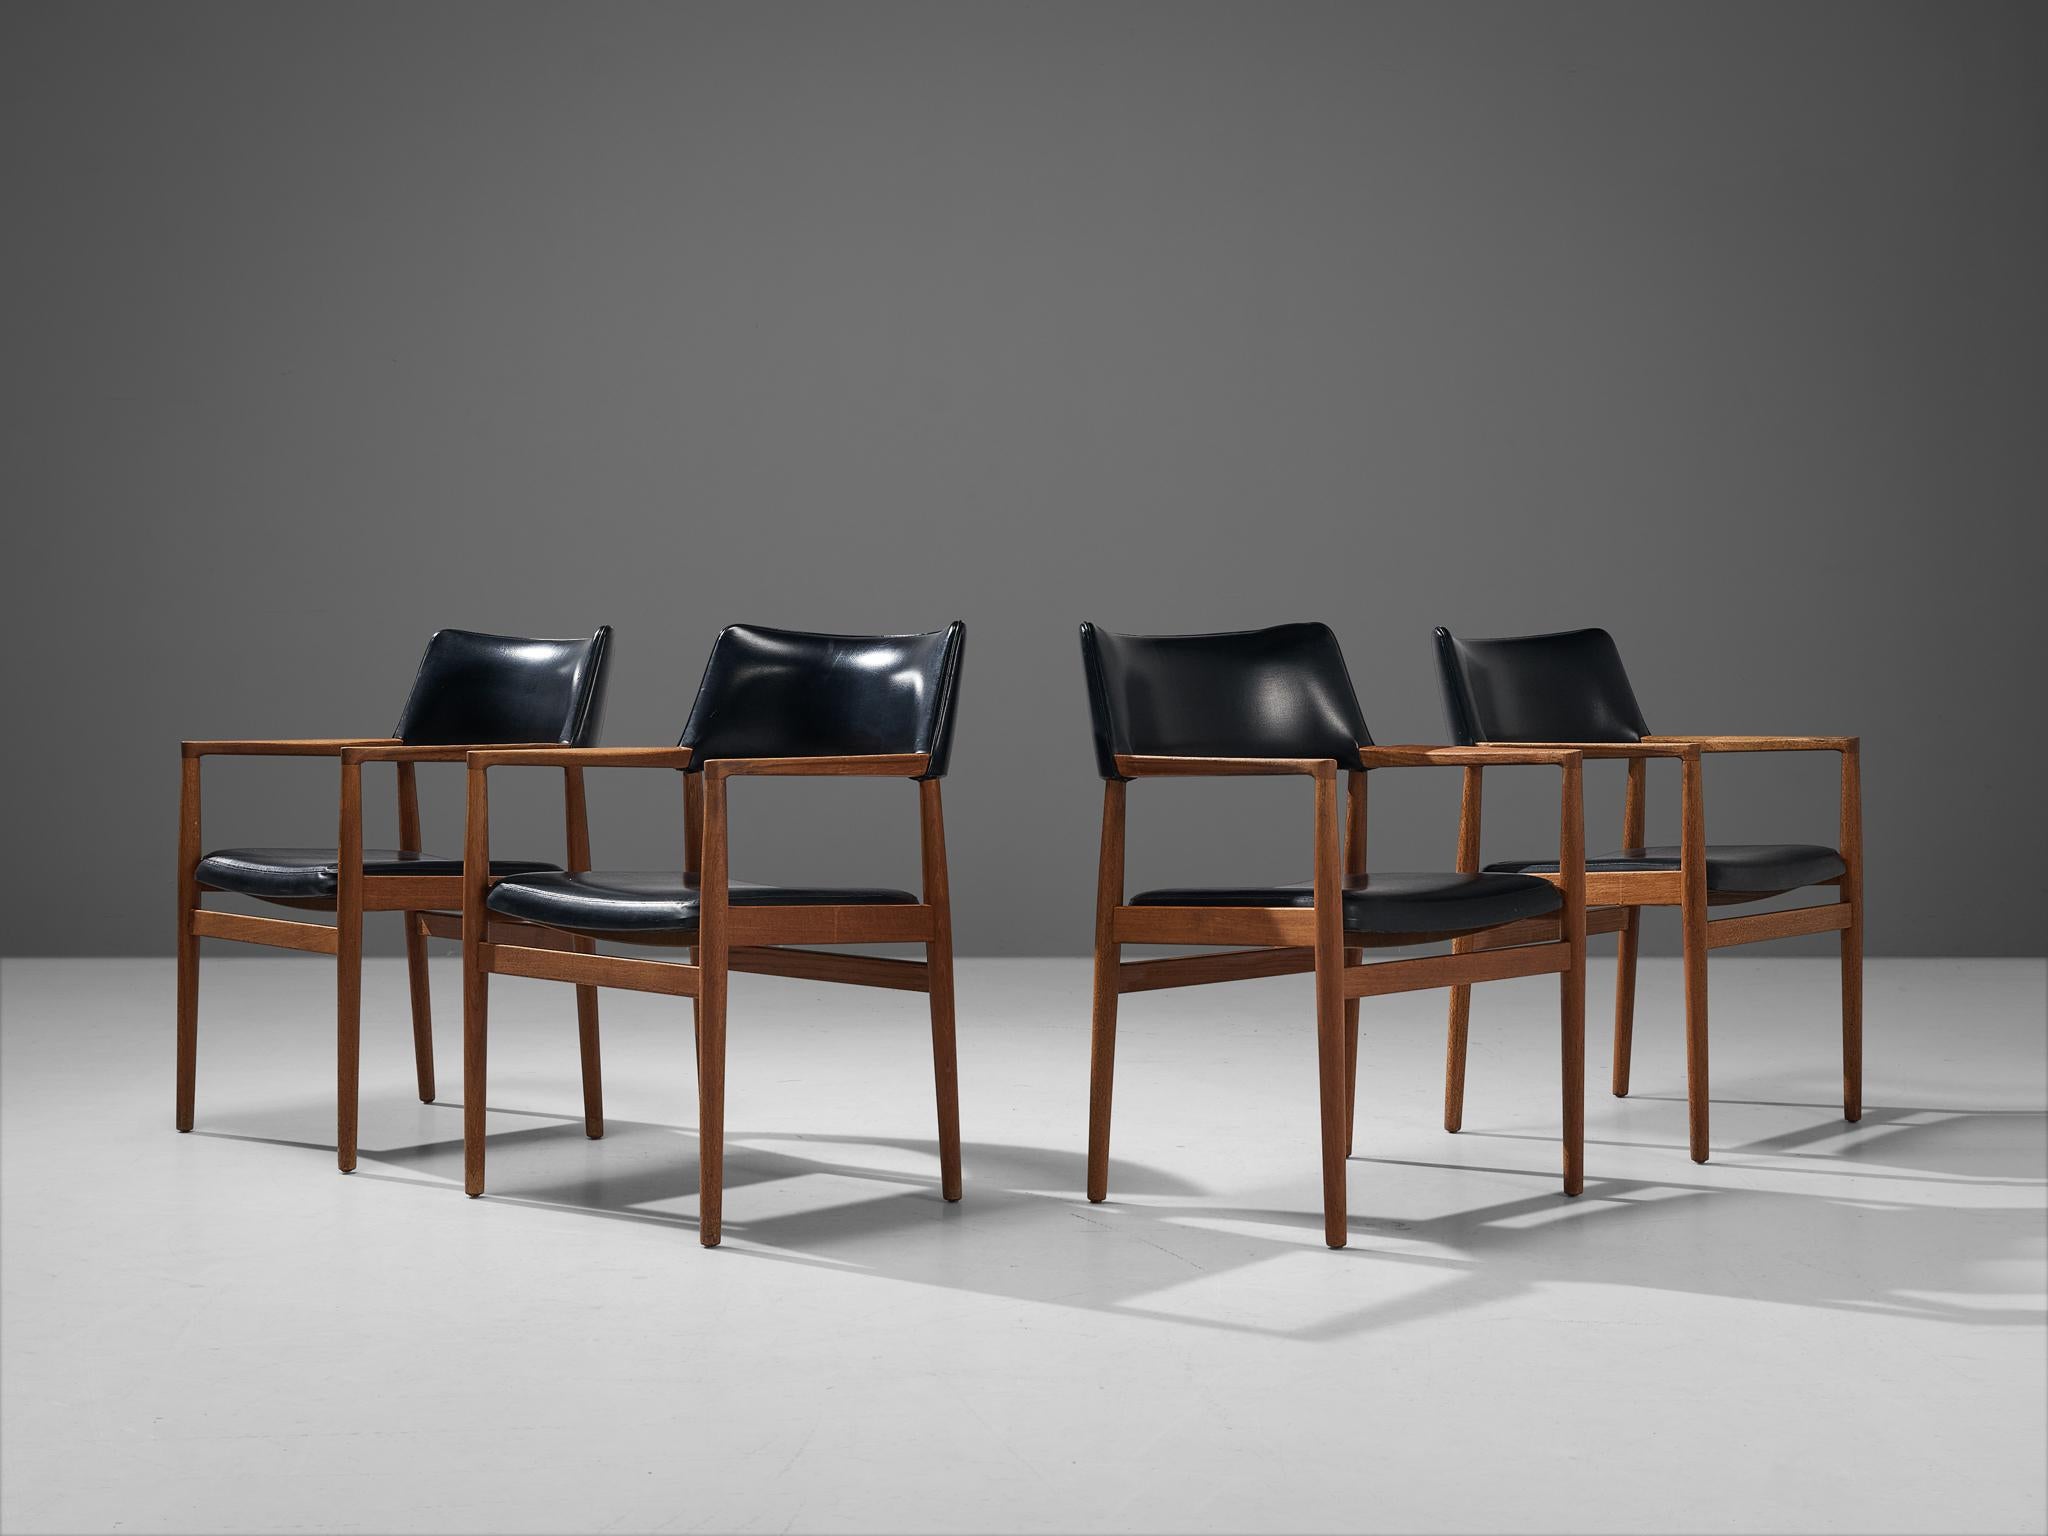 Set of four dining chairs, leatherette, teak, Denmark, 1960s.

This set of four armchairs shows strong resemblances to the Tove and Edvard Kindt-Larsen’ chair for Gustav Bertelsen & Co designed in 1958. This classic set is being a wonderful example